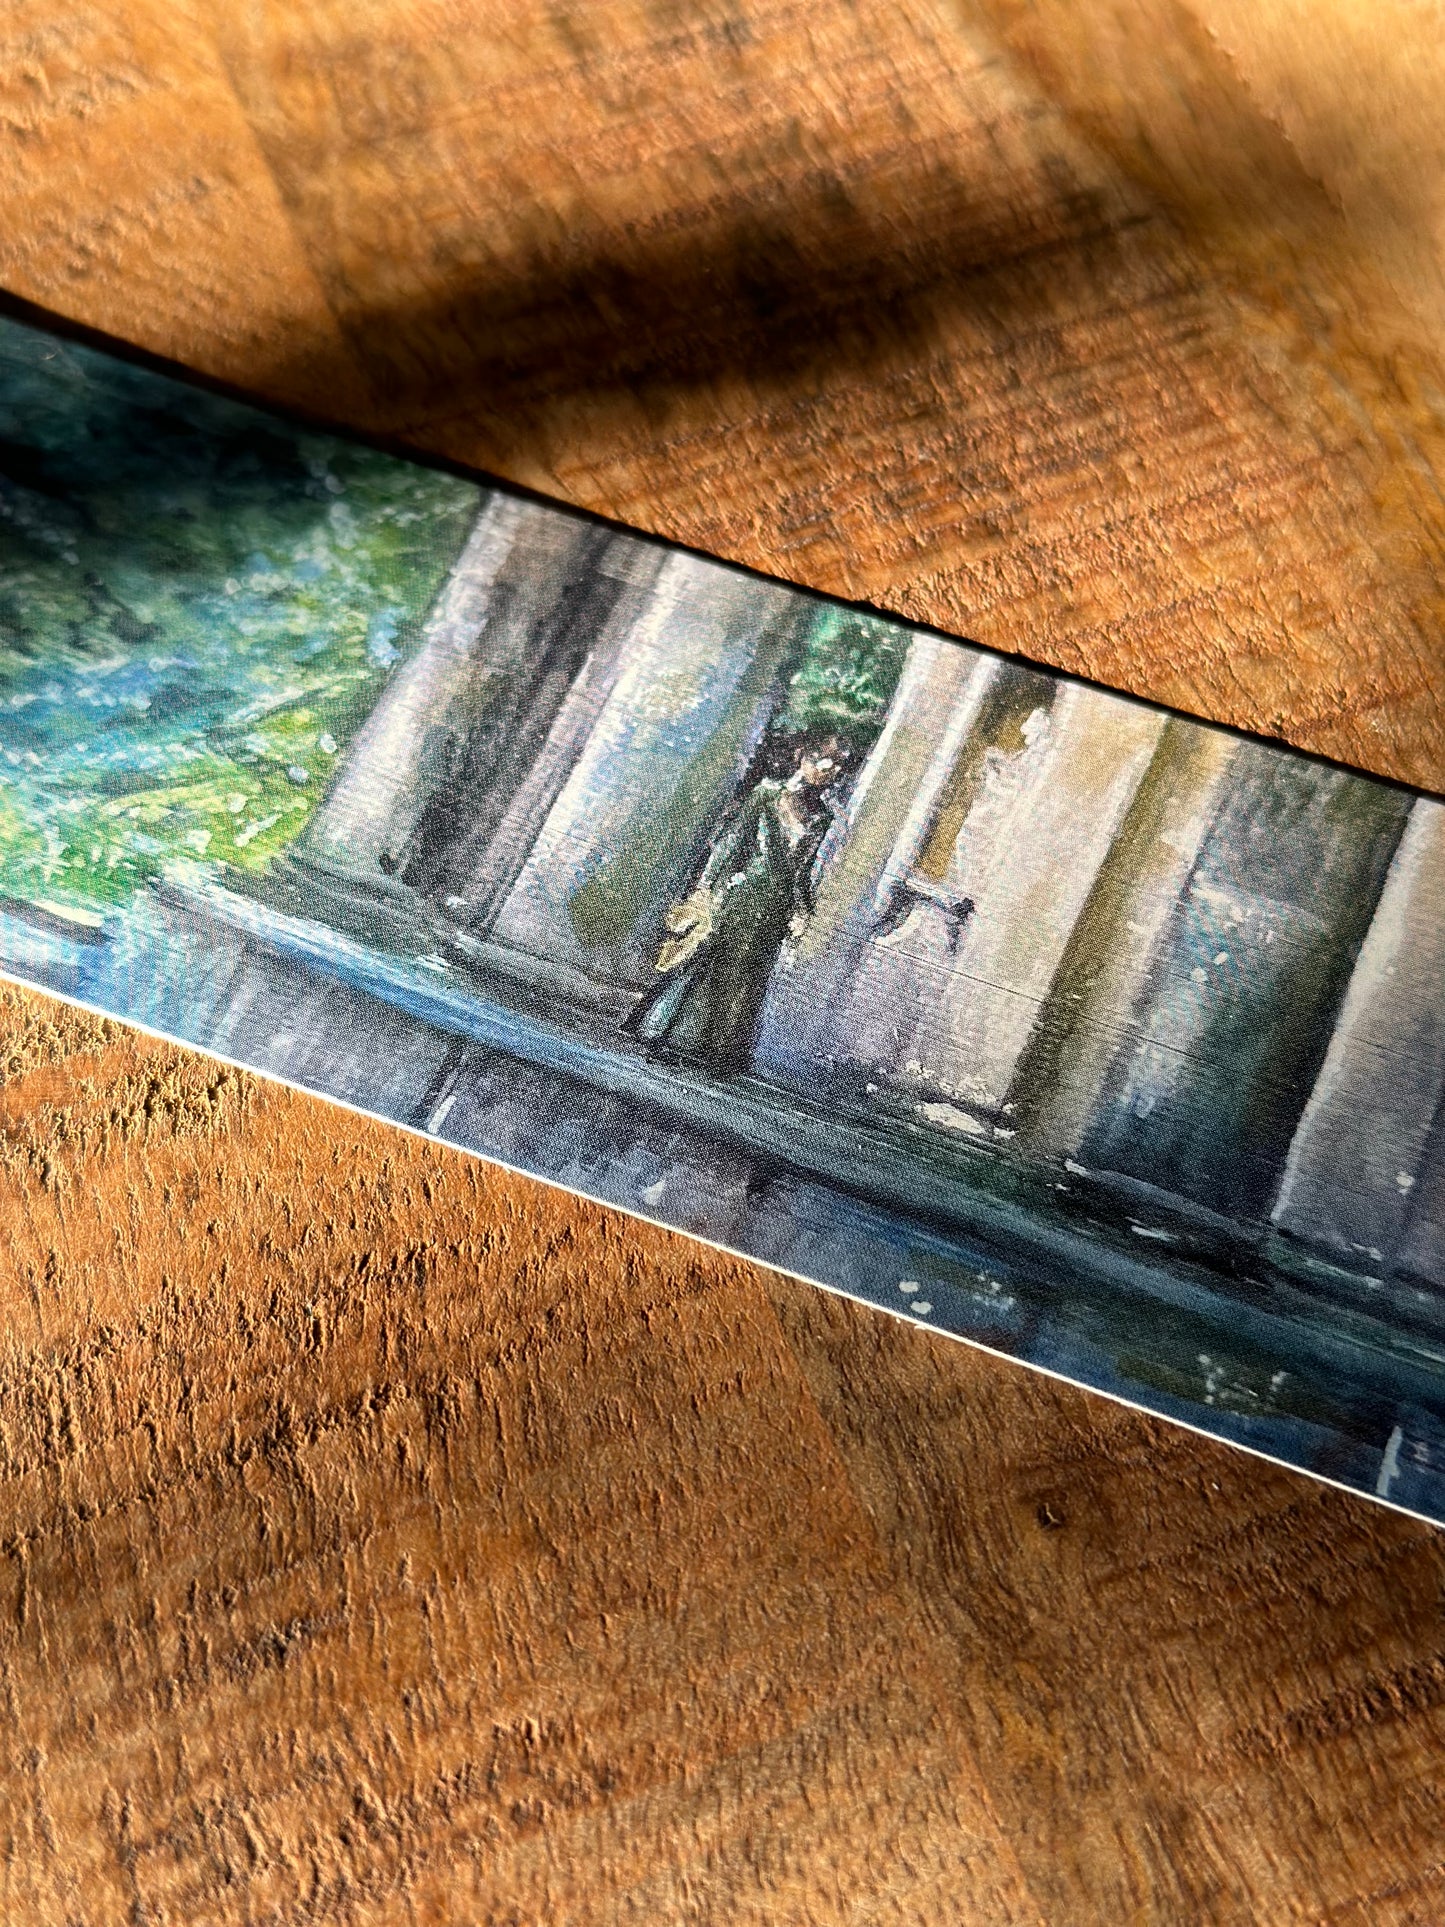 Most ardently Bookmark